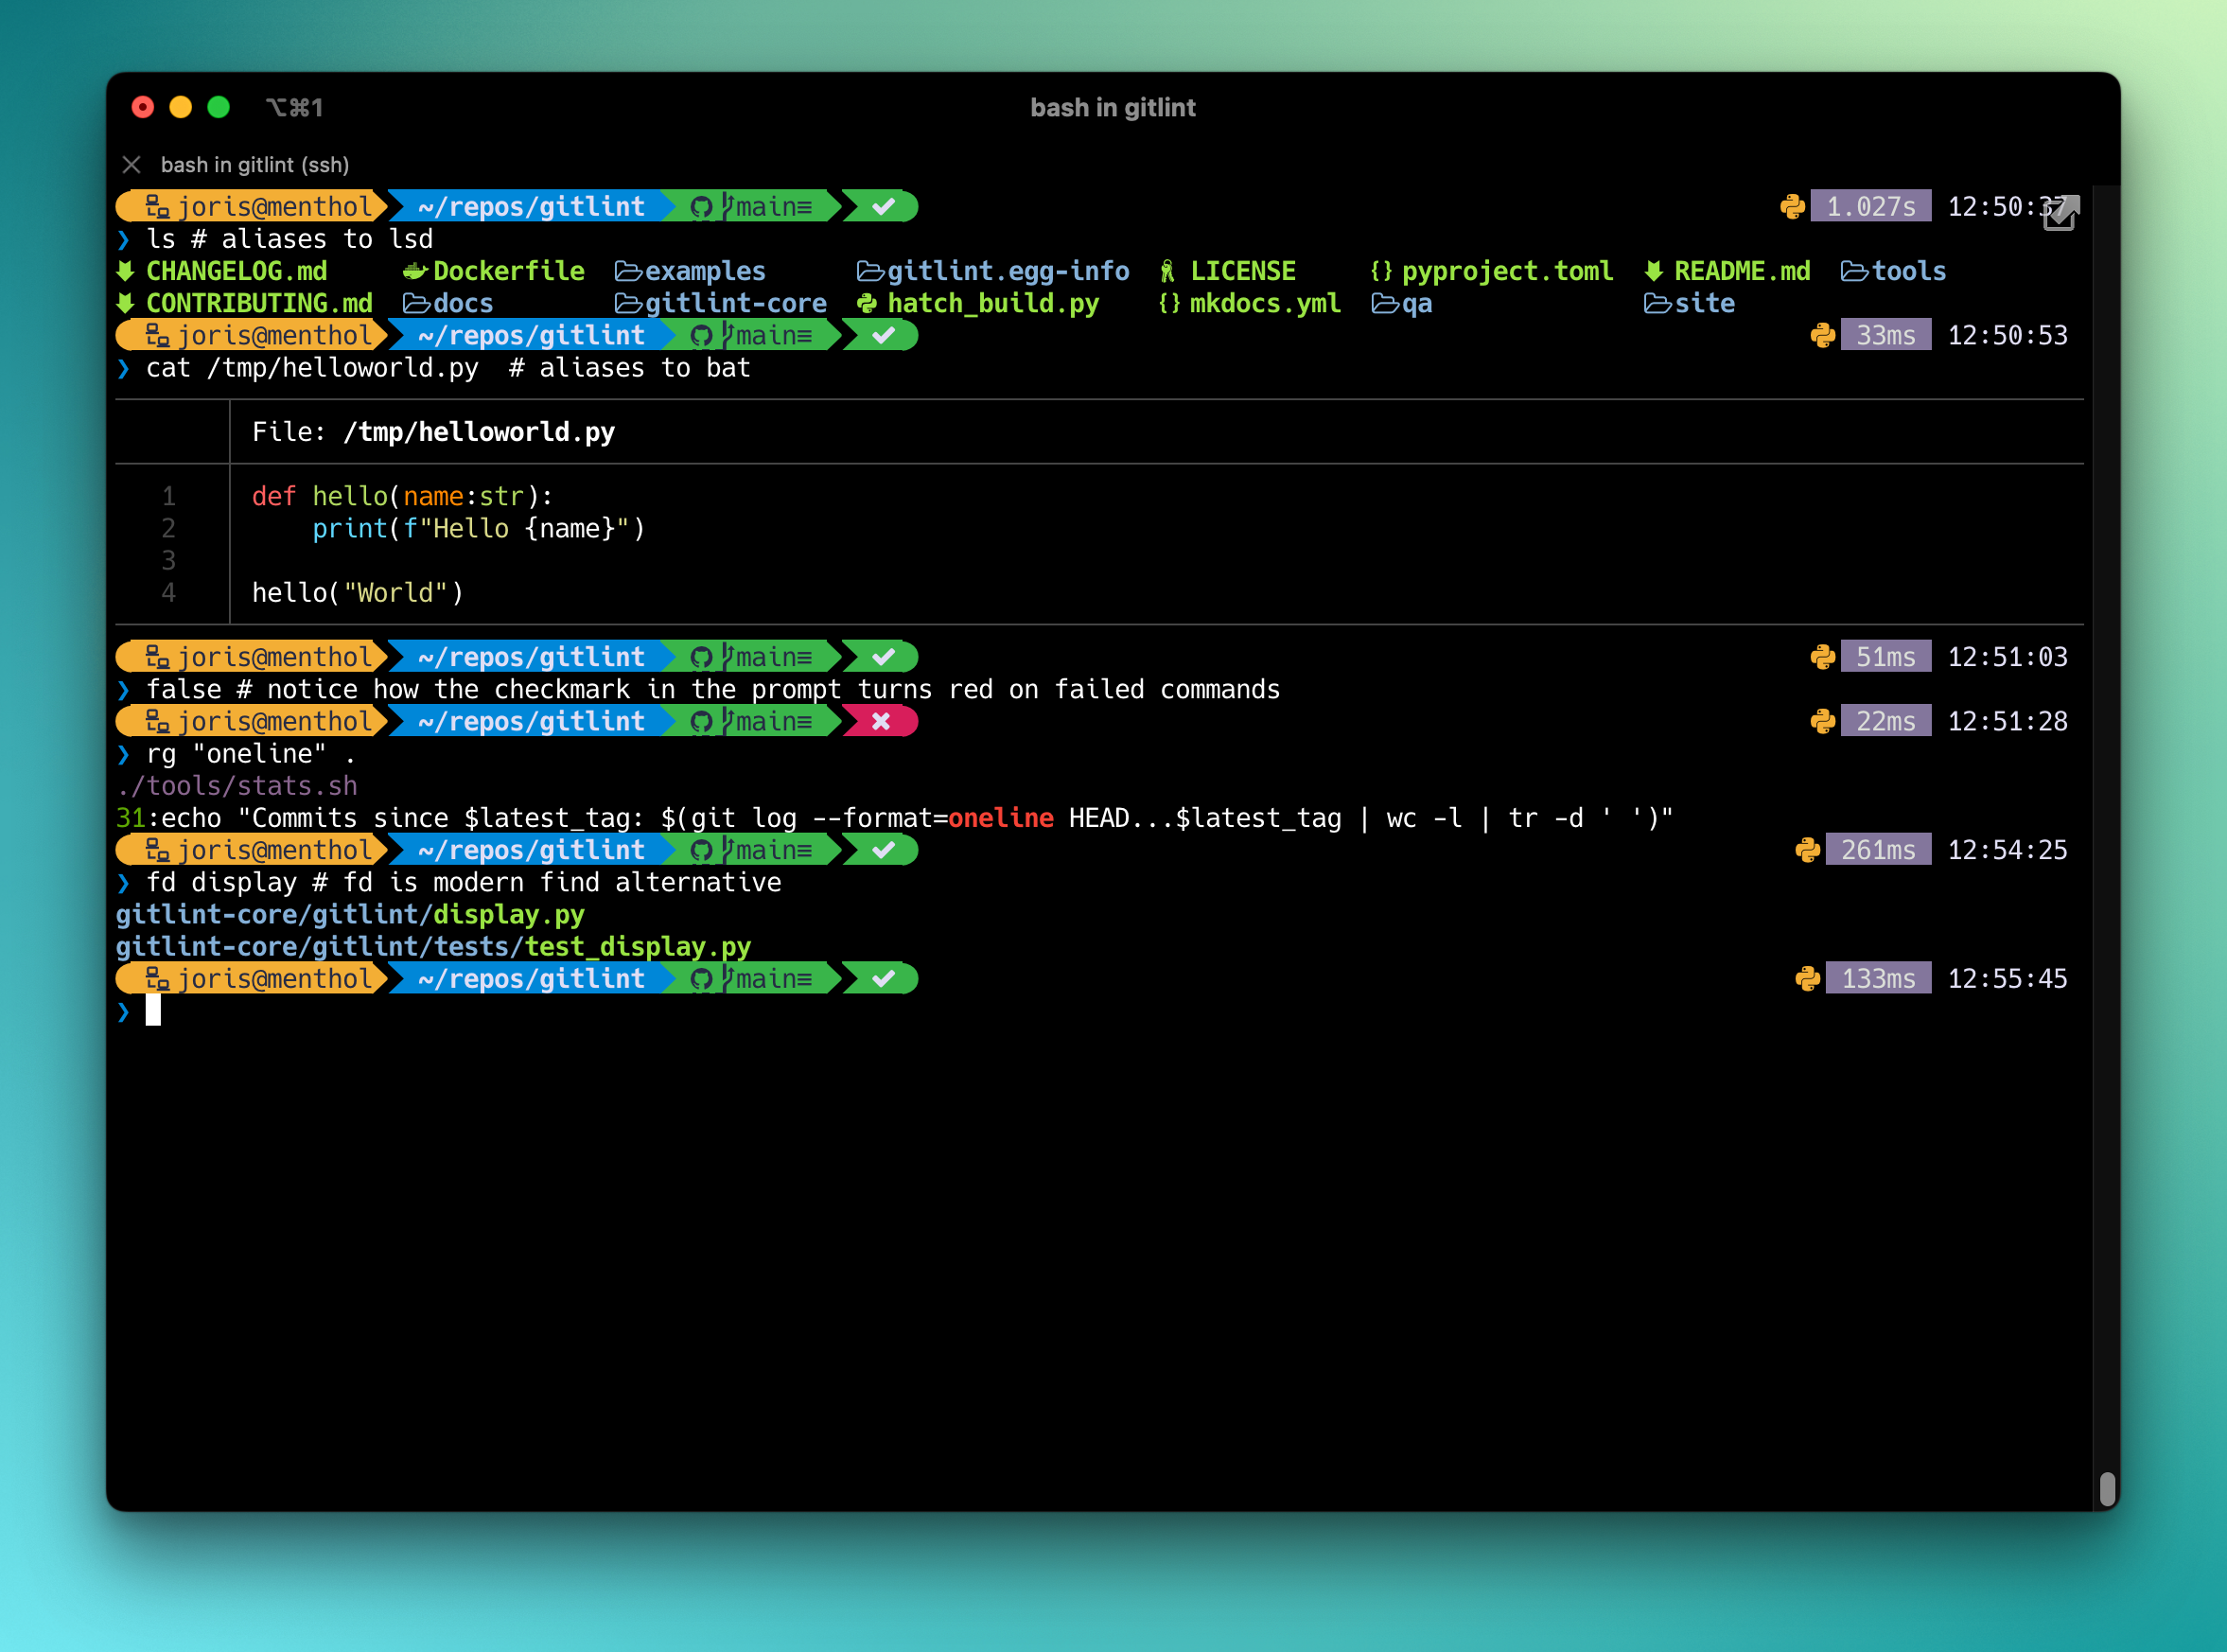 iTerm terminal window using an Oh My Posh prompt, showing some of the commandline tools listed in this post.